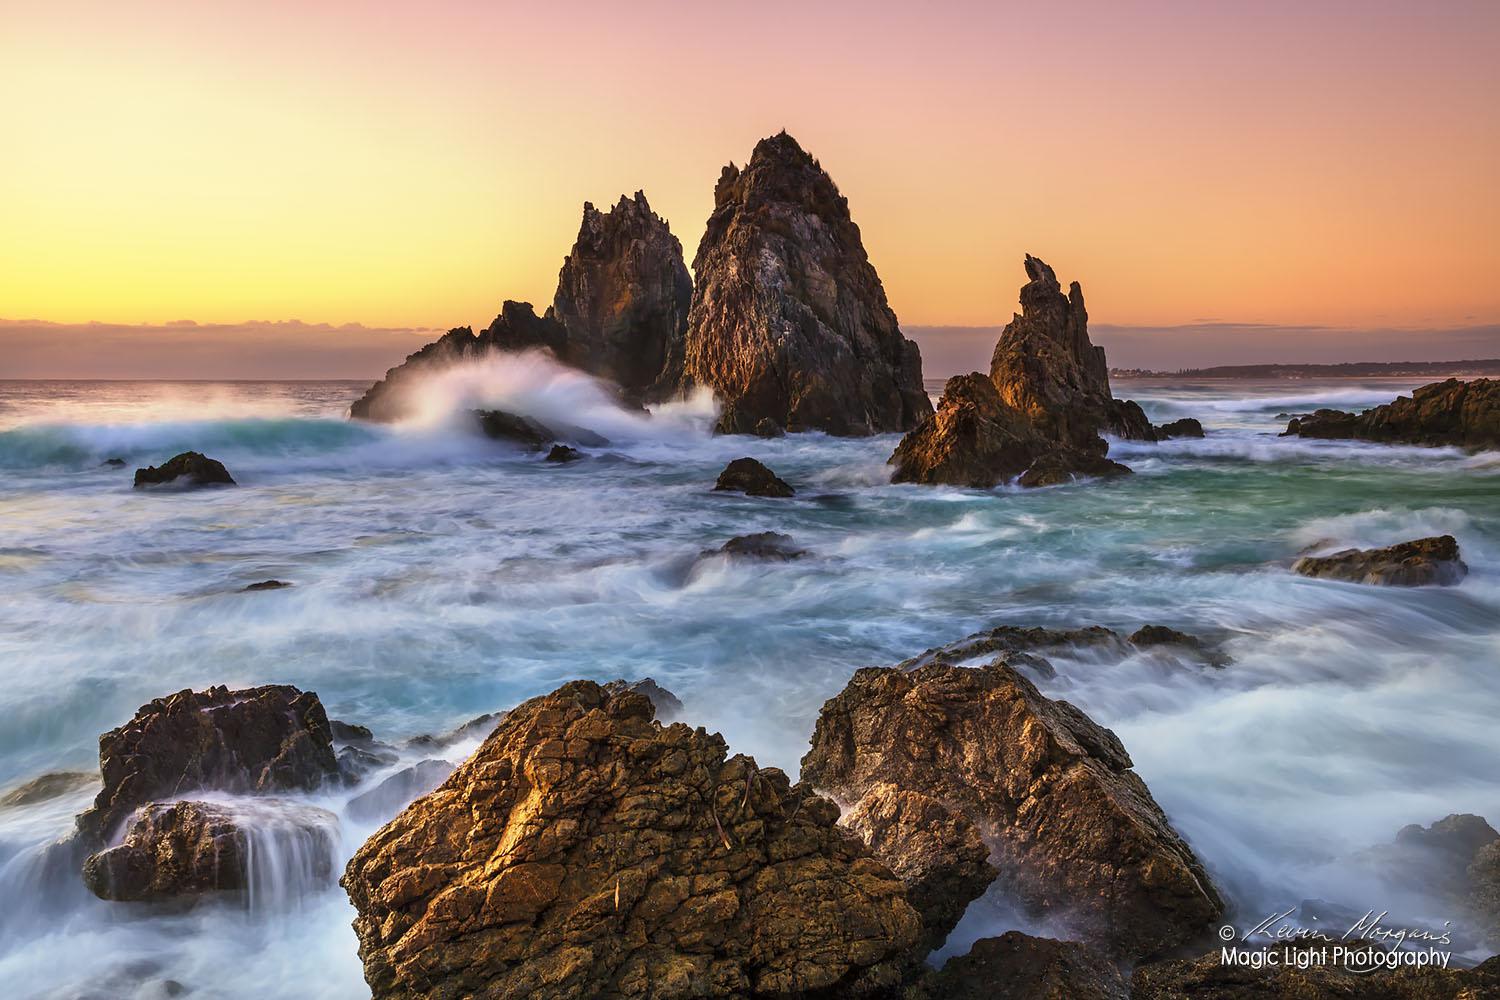 Sunrise at Camel Rock in Bermagui on the South Coast of New South Wales, Australia.